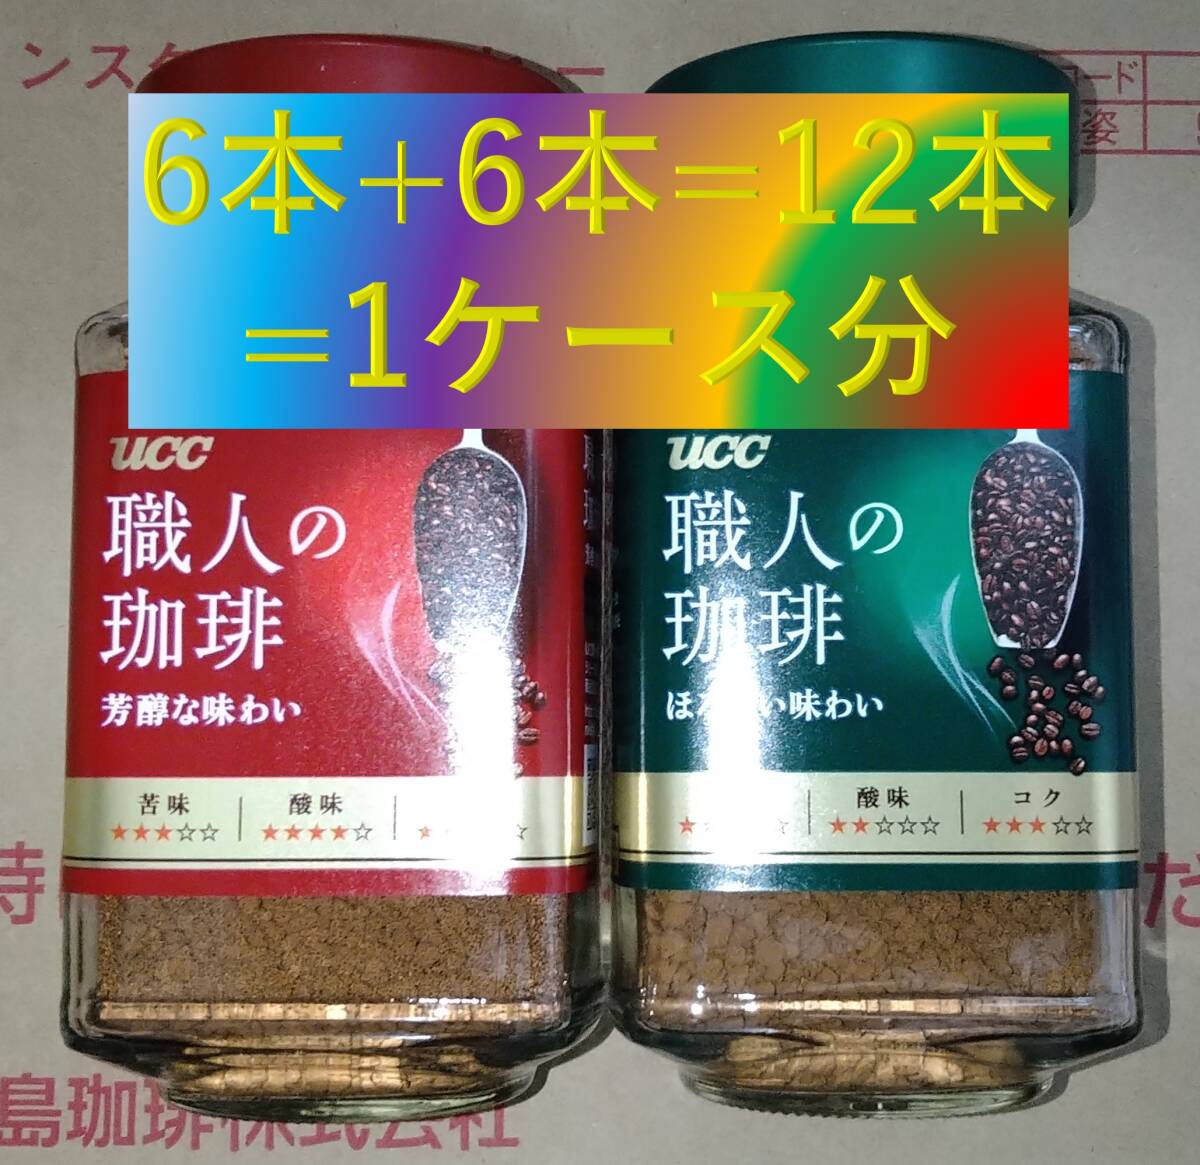 VUCC worker. .. bin 90g×1 2 ps V instant coffee set prompt decision free shipping Gold Blend b Len ti maxi m80 120 140